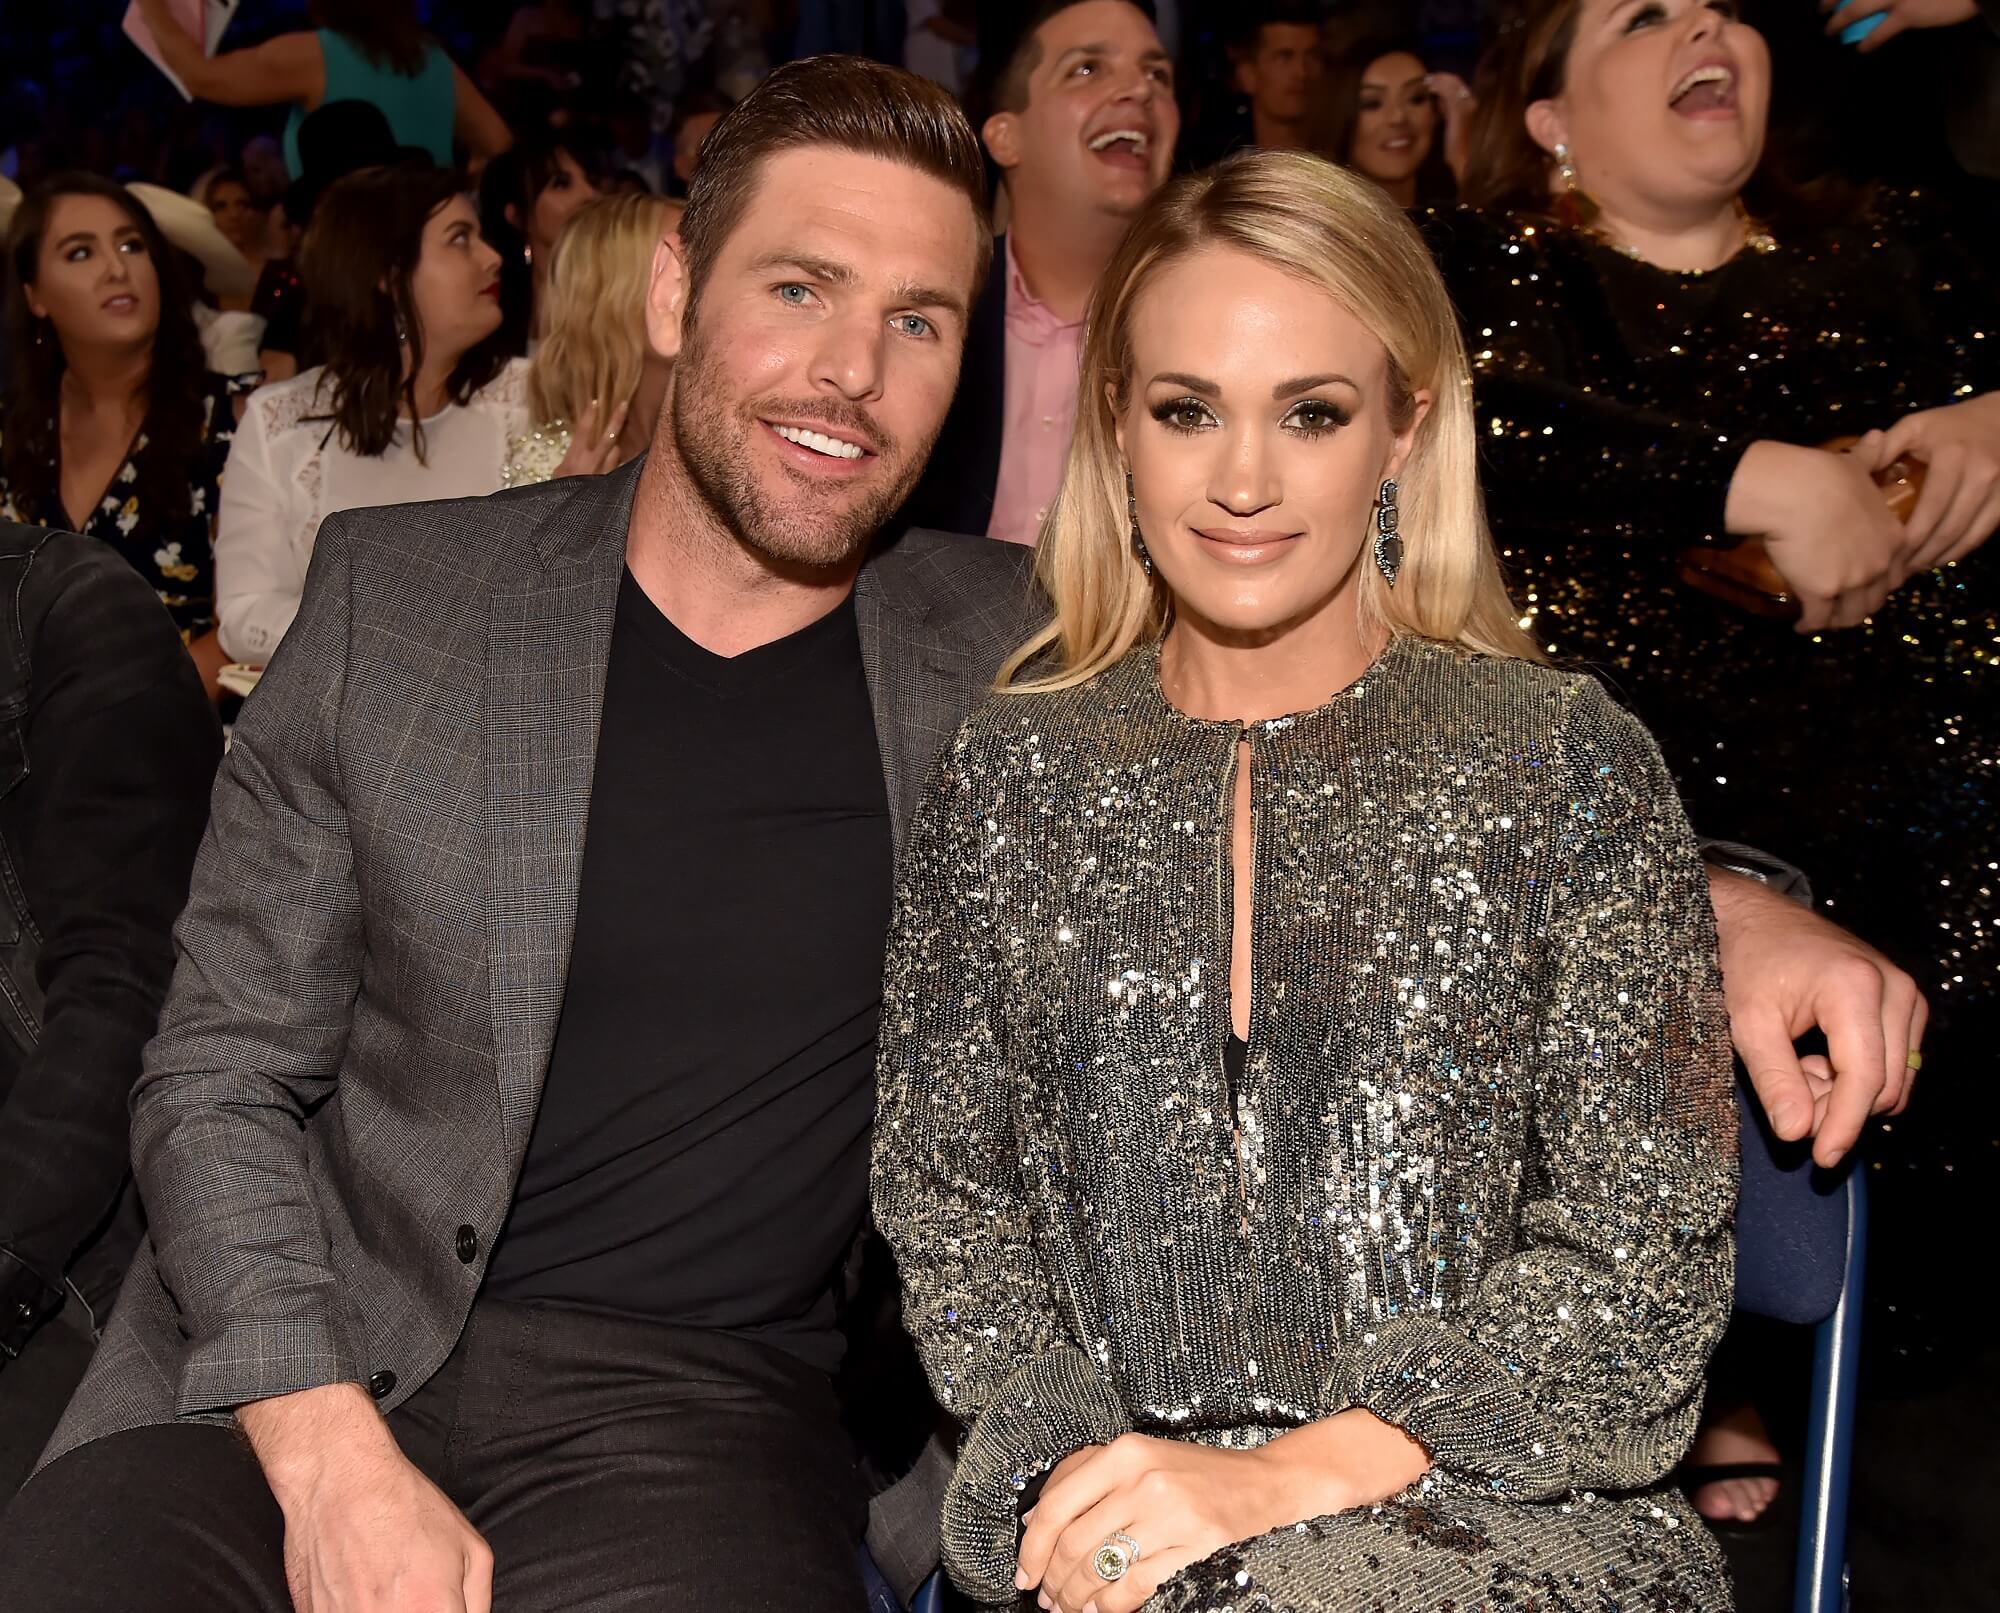 Mike Fisher and Carrie Underwood sit beside each other and look at the camera